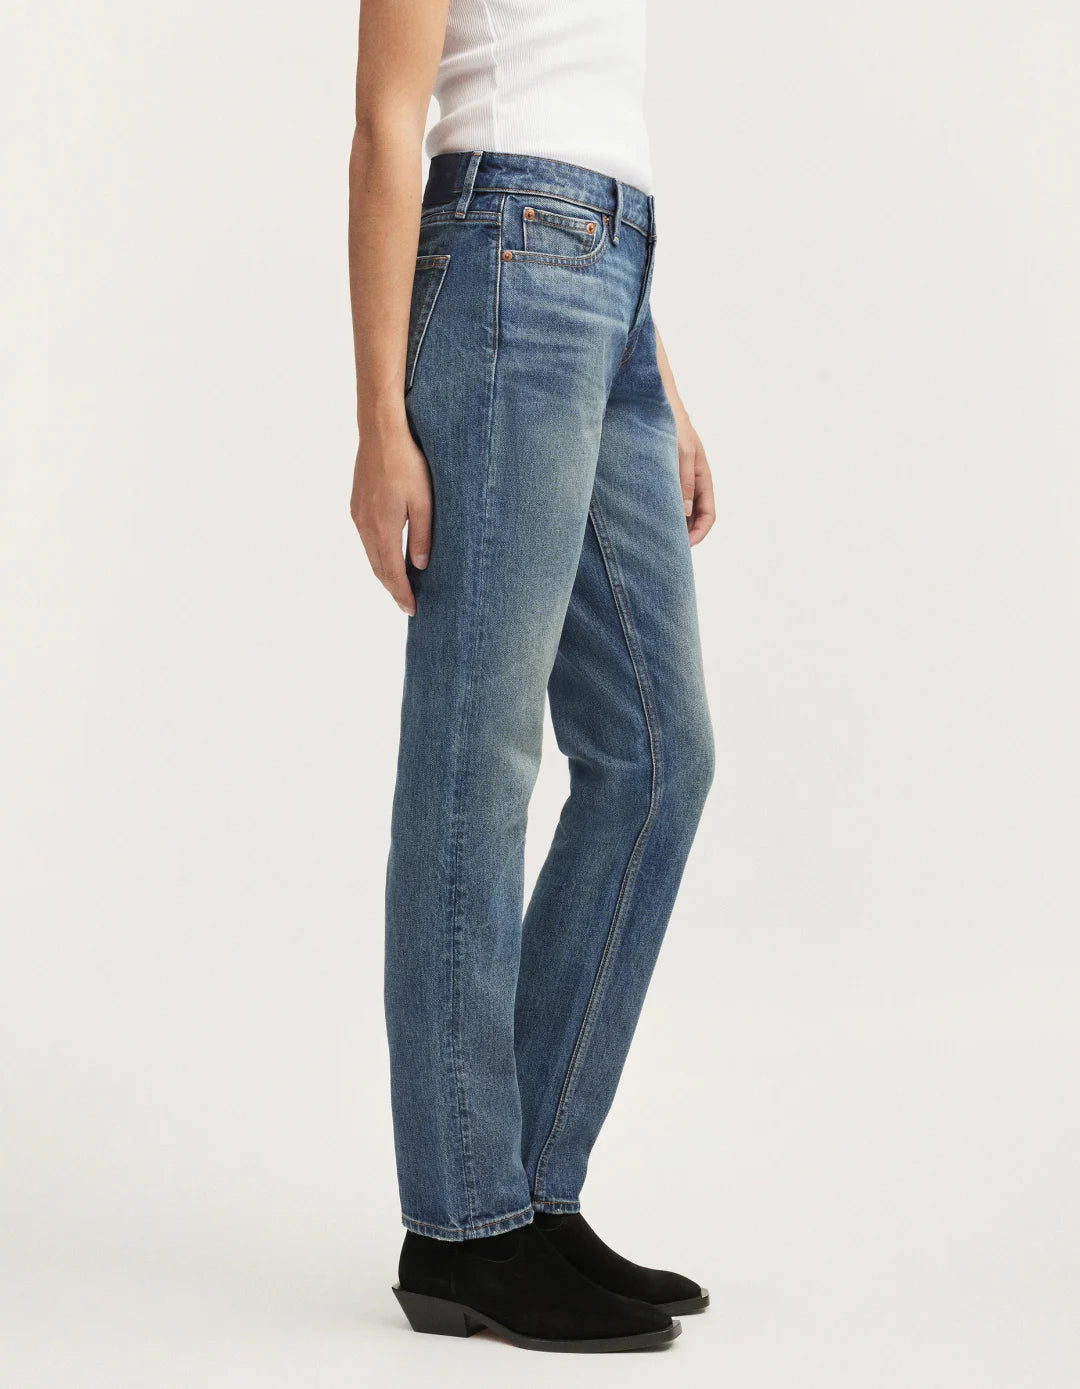 Girlfriend style jeans in a mid blue wash